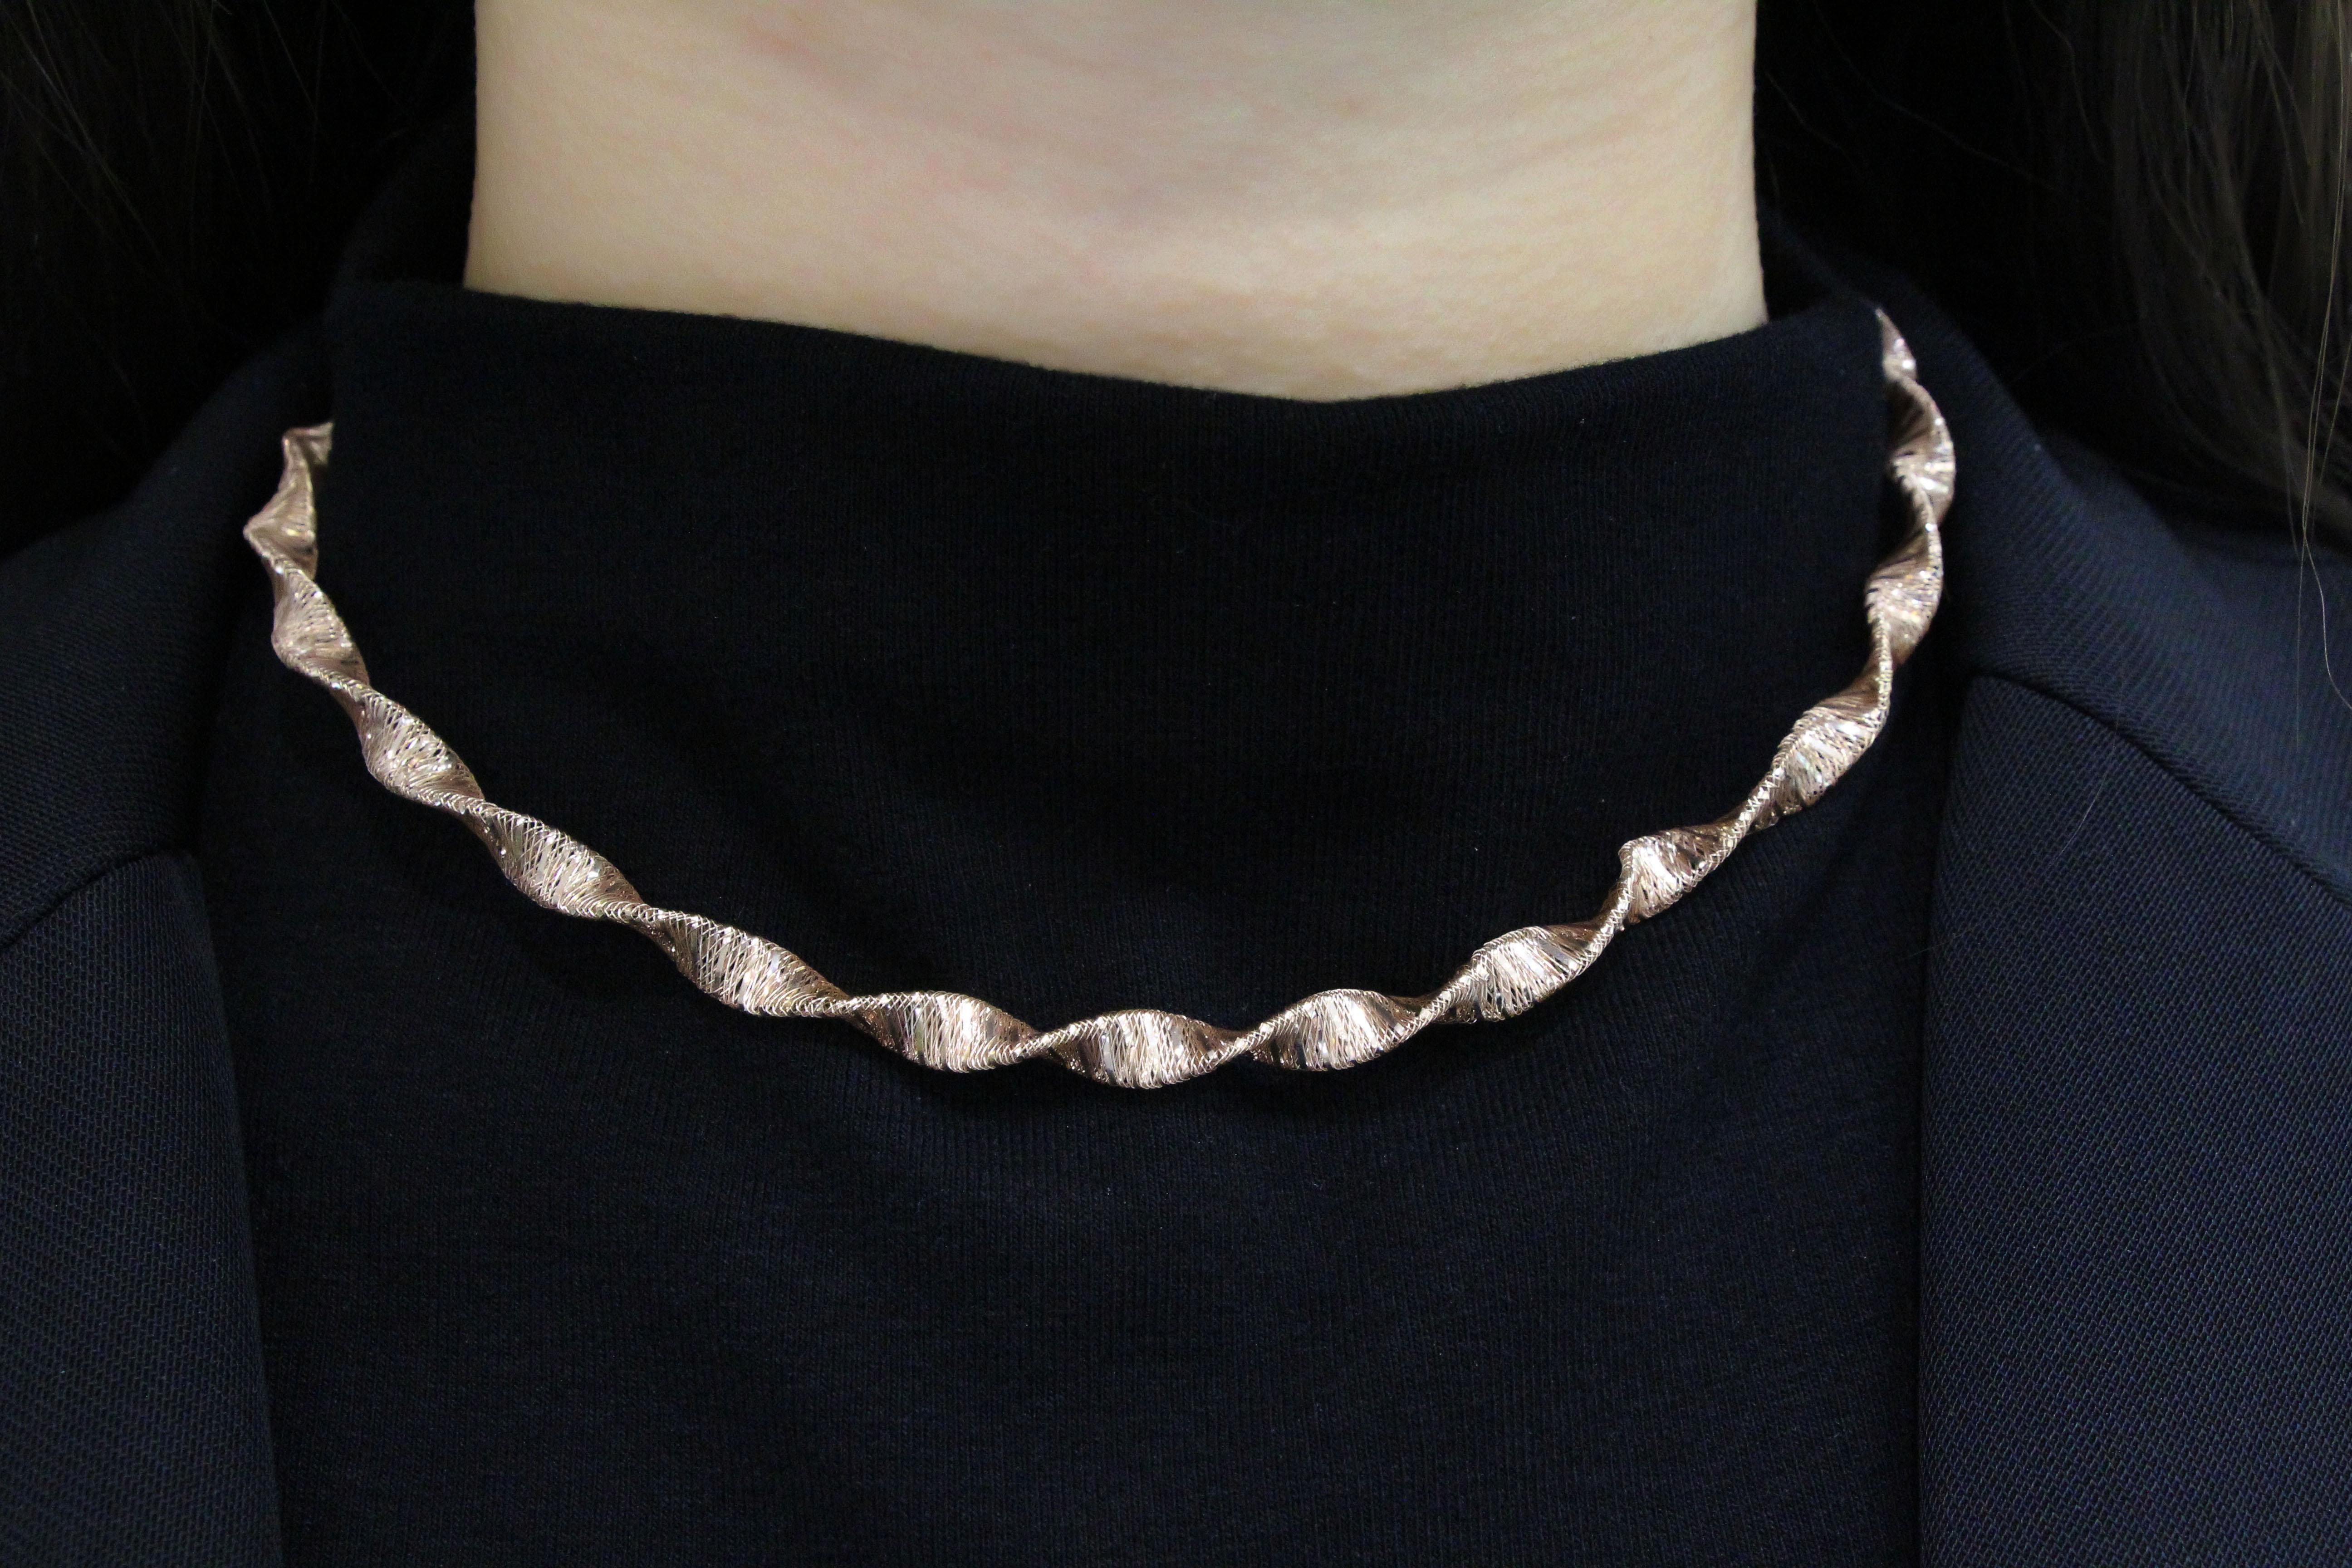 Italian 18K Rose Gold Necklace with Twisted Design In New Condition For Sale In Macau, MO